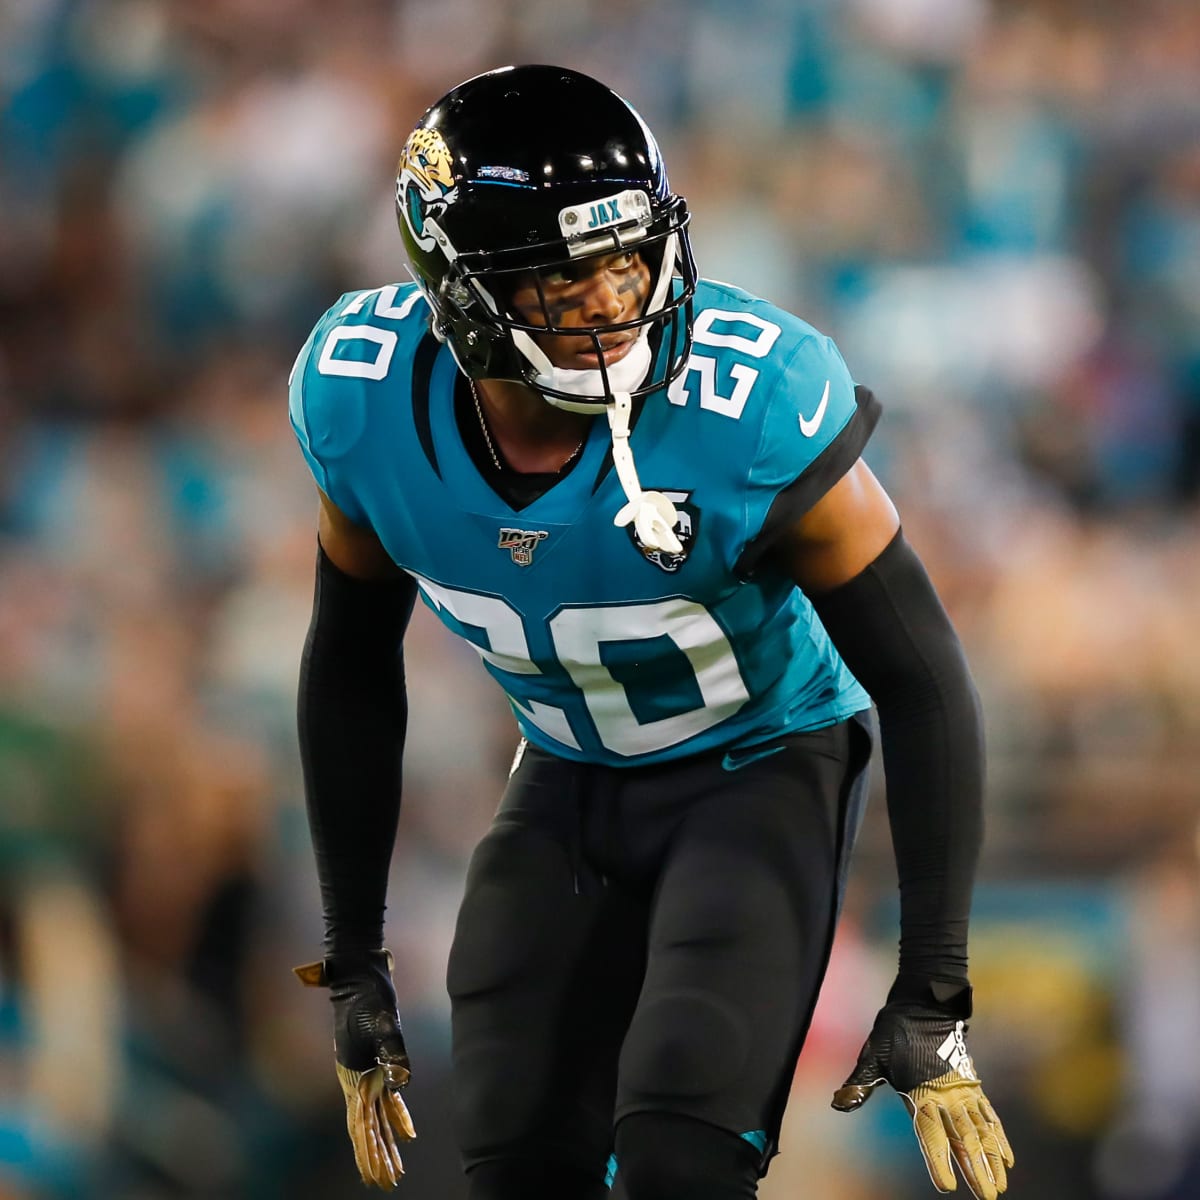 Episode 705: BREAKING NEWS! Jalen Ramsey Traded To The Miami